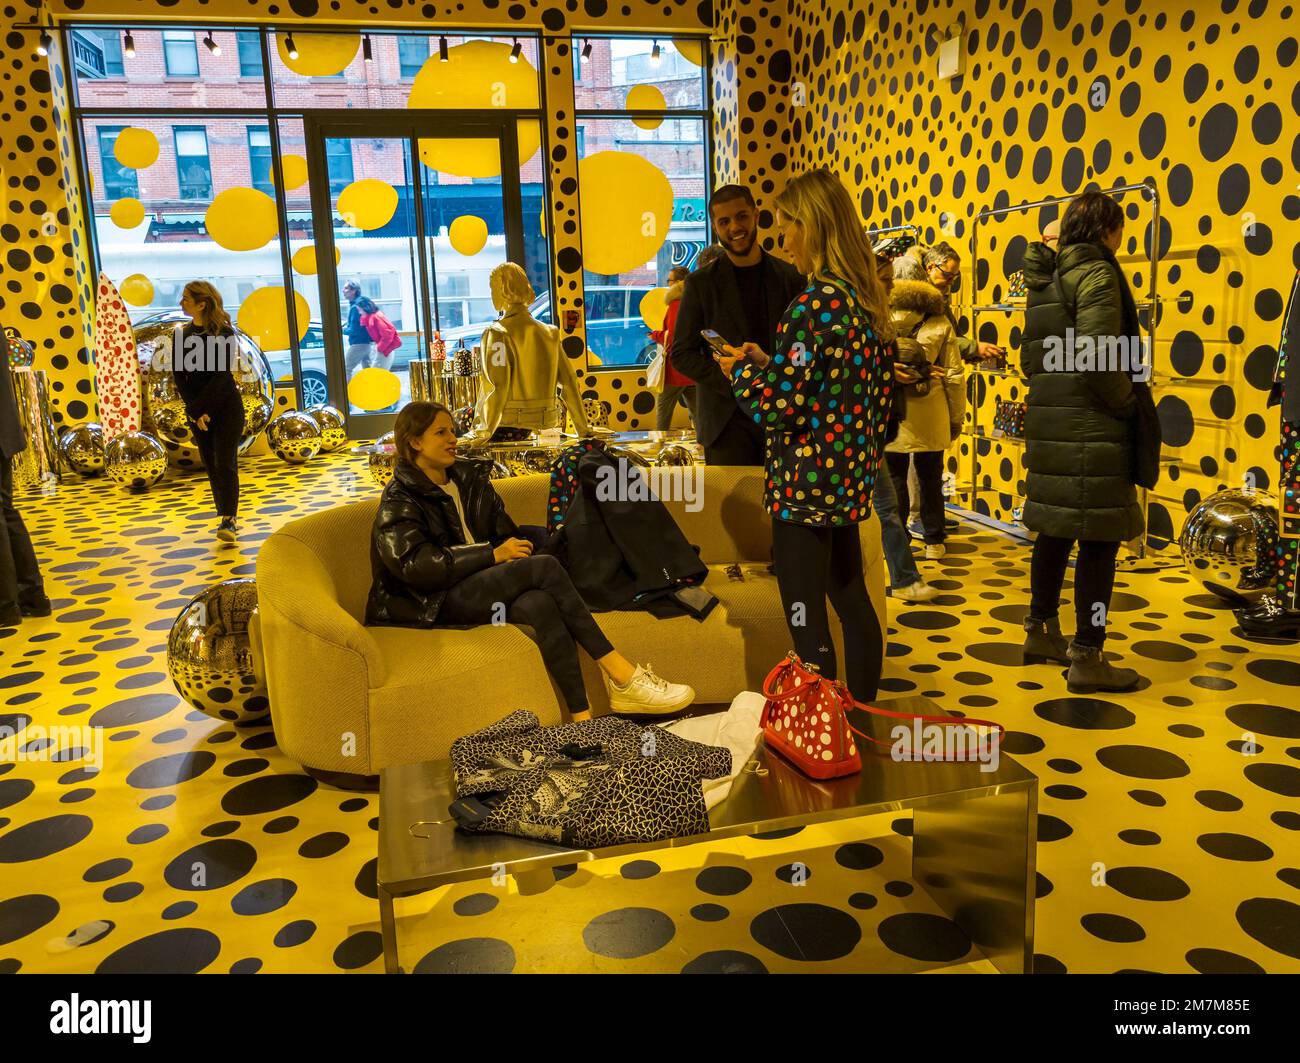 Crowds flock to the Louis Vuitton store in the Meatpacking